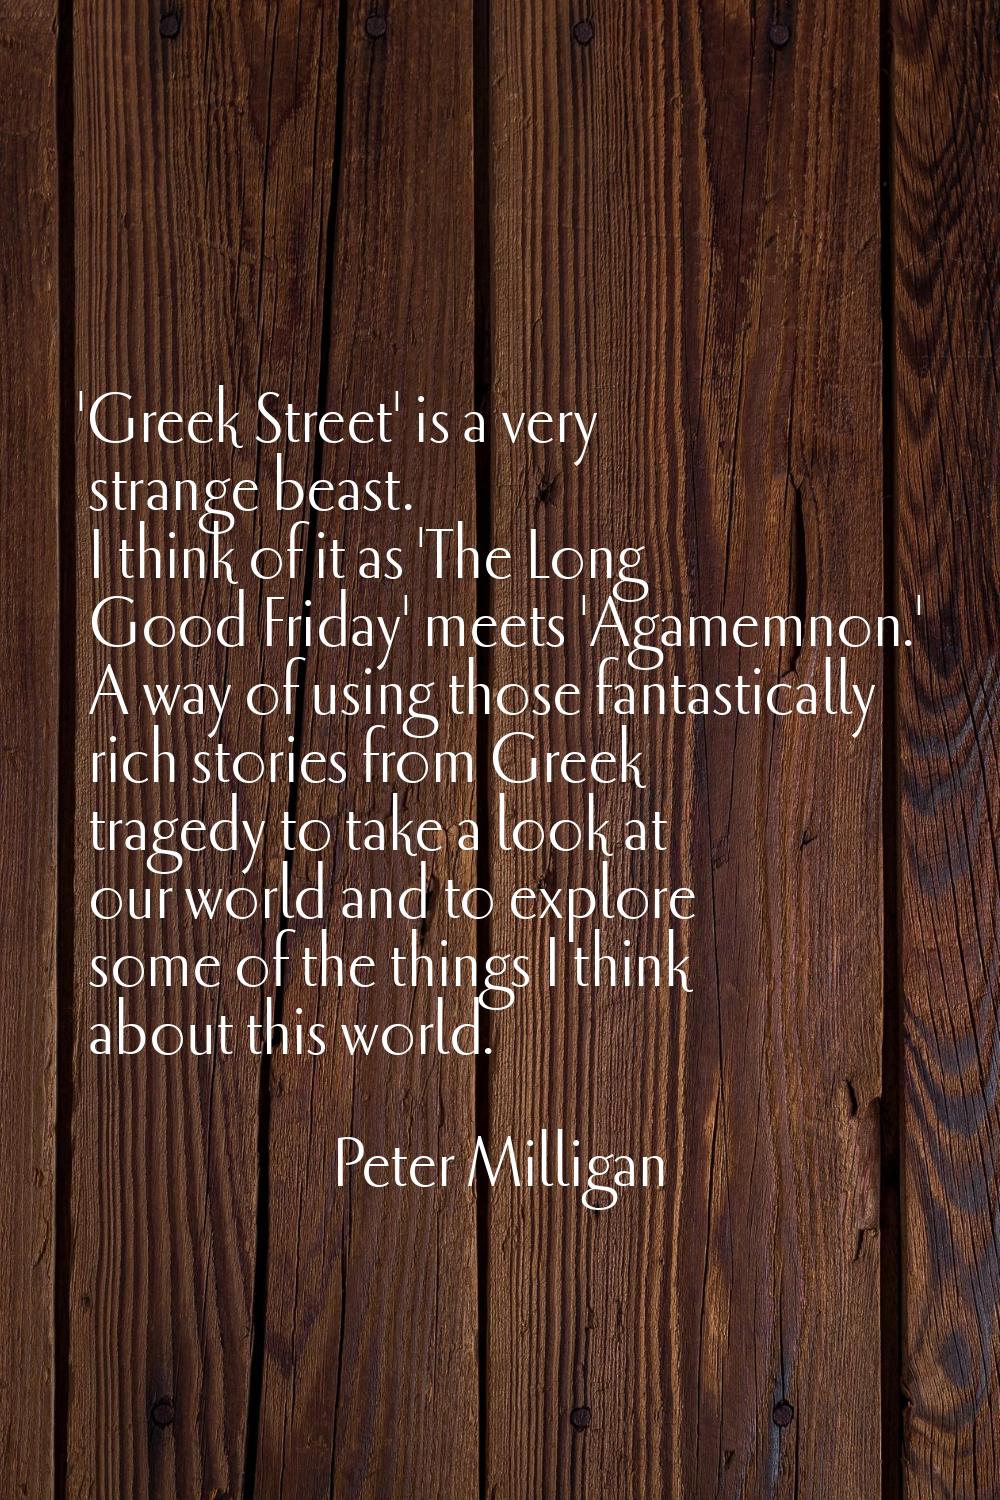 'Greek Street' is a very strange beast. I think of it as 'The Long Good Friday' meets 'Agamemnon.' 